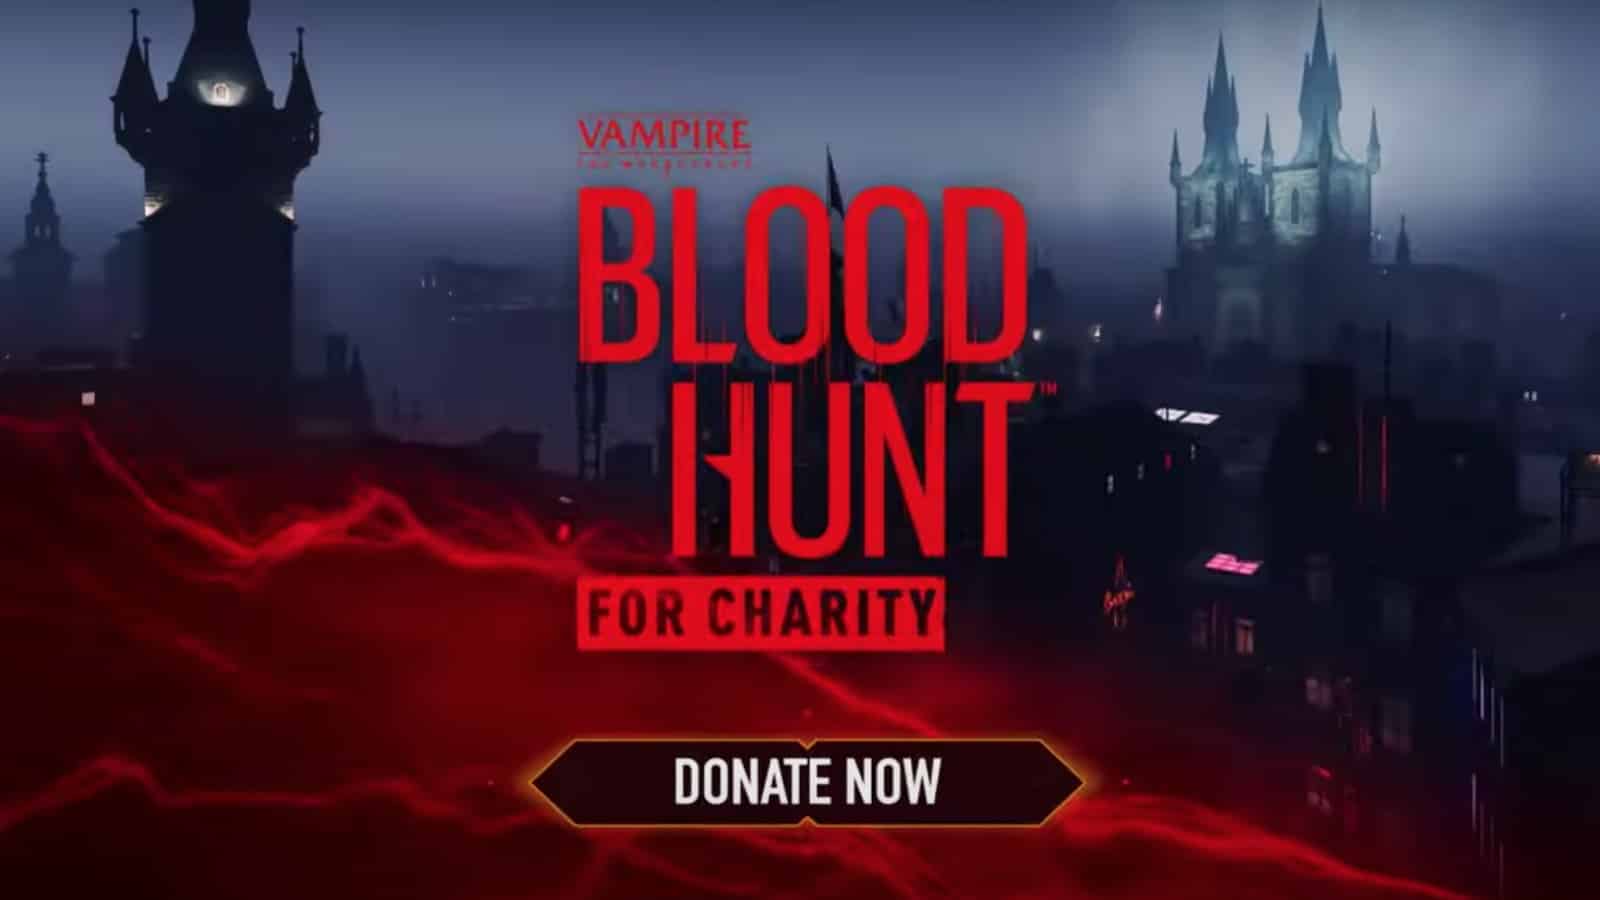 vampire the masquerade bloodhunt for charity event